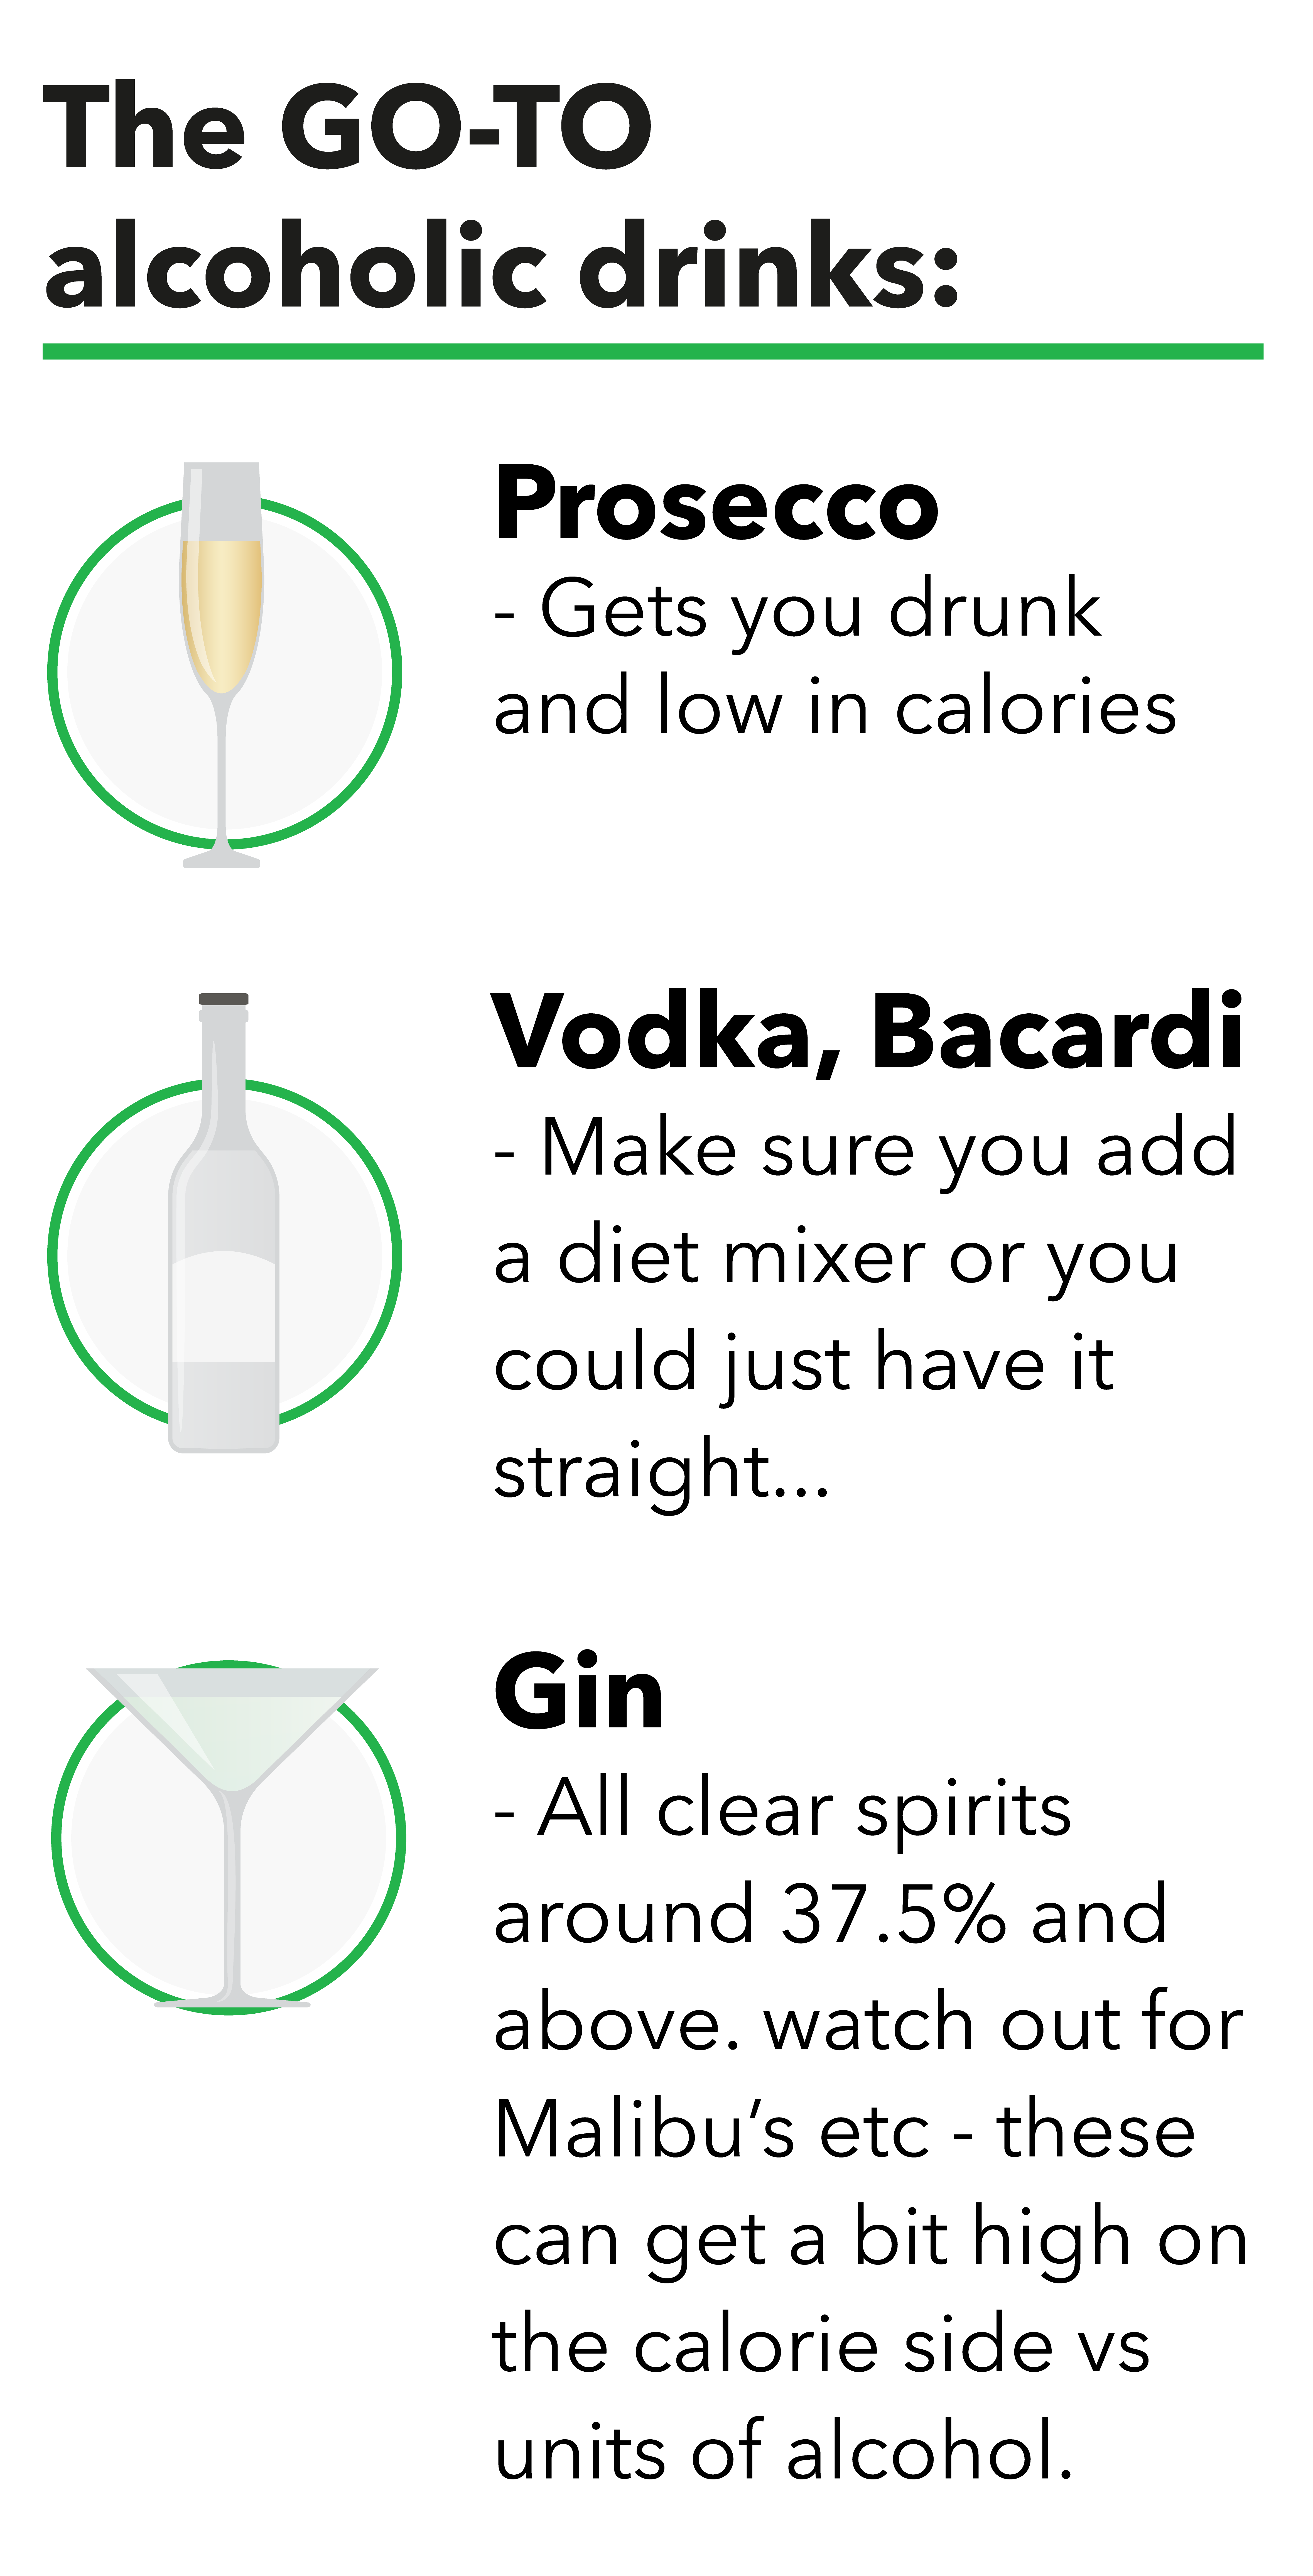 _Best alcohol to choose for weight loss - GO-TO Drinks.png